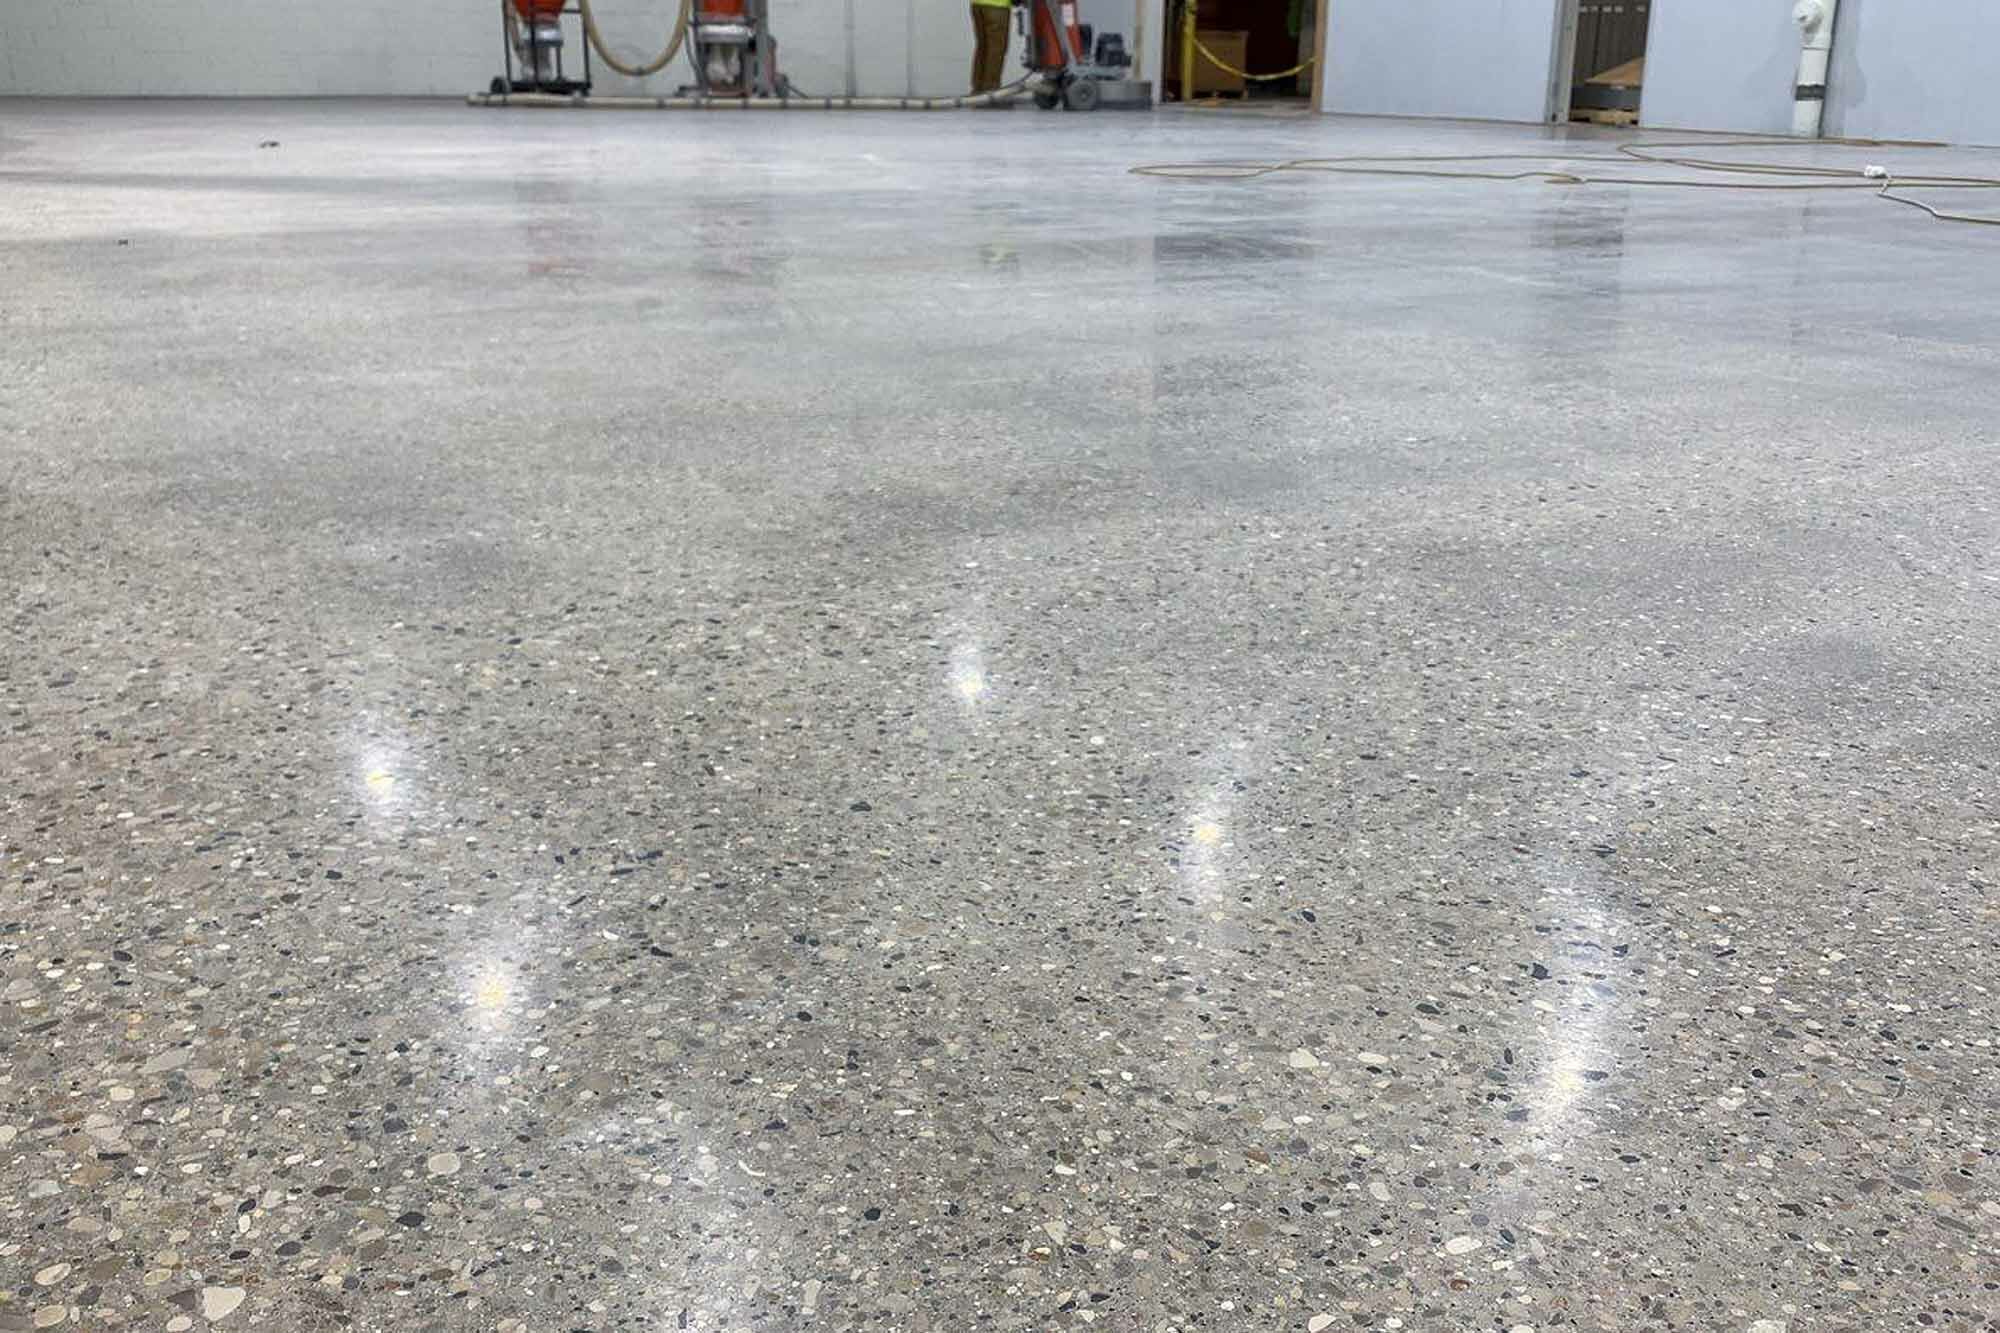 Concrete Hardener can Provide Many Benefits for your Commercial, Industrial and Institutional floors